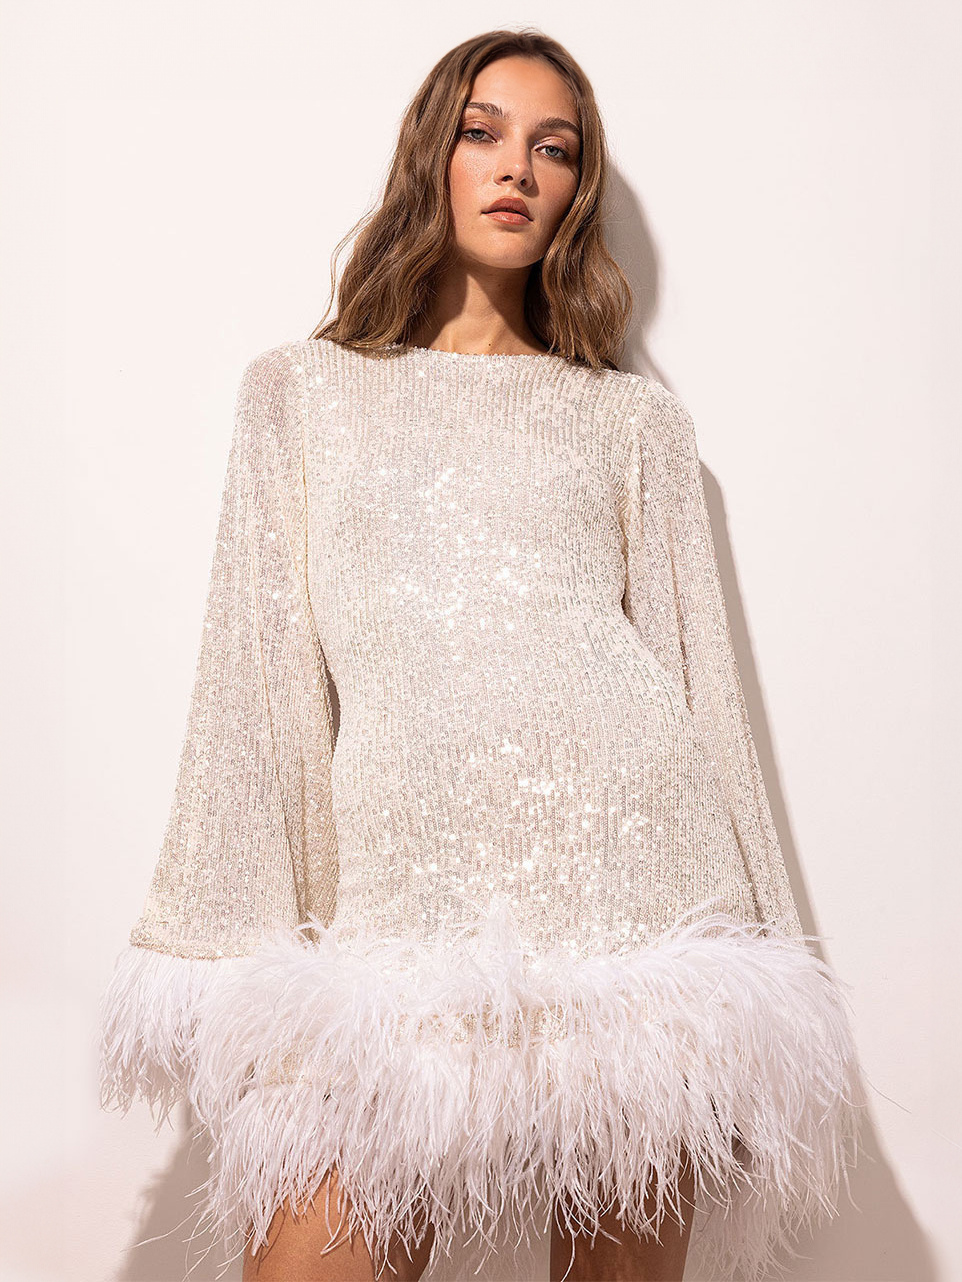 White Sequins Dress Flared Sleeves Feather Trim Backless Sexy Mini Dresses